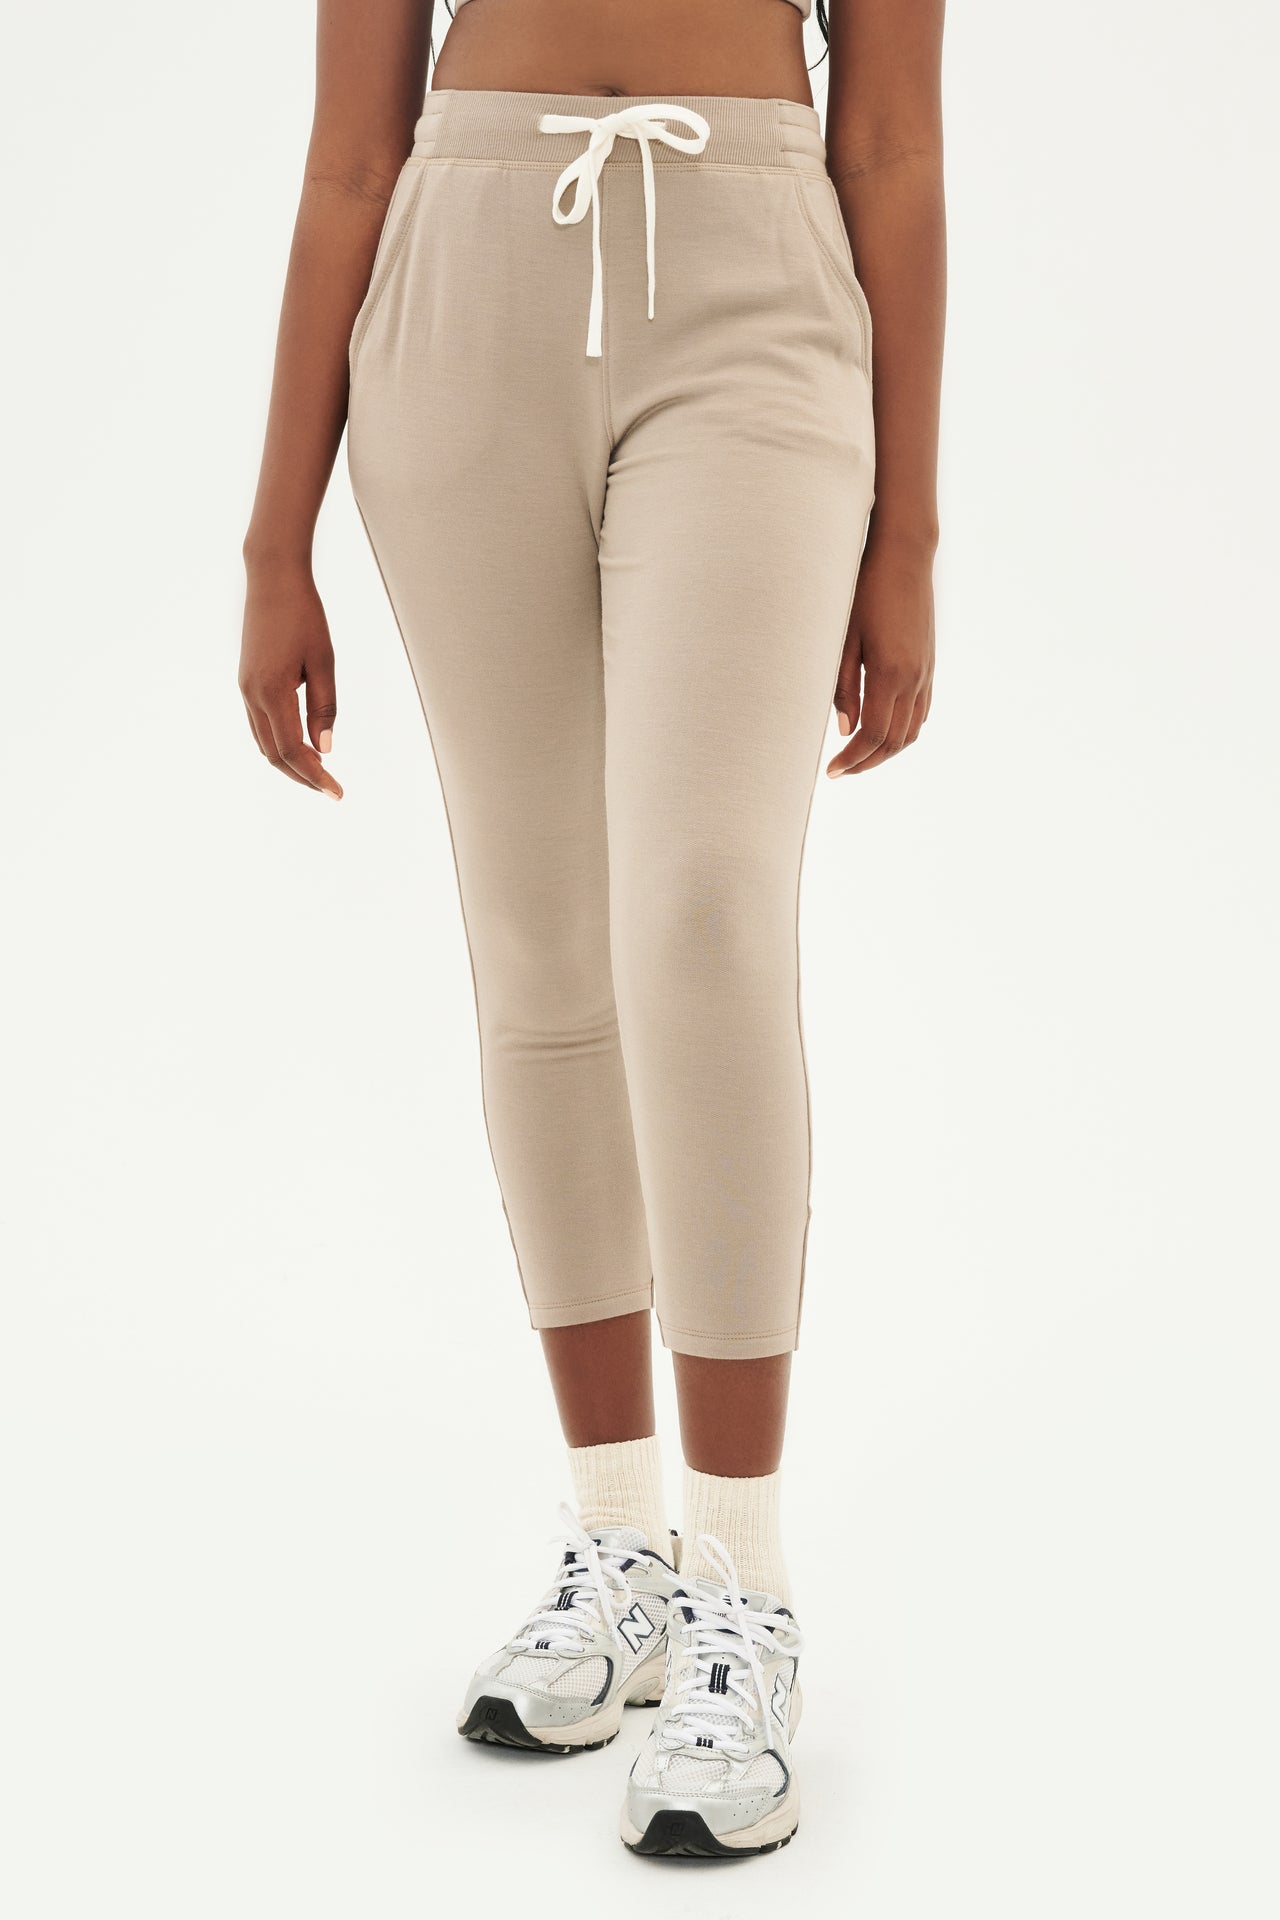 Front view of woman wearing light brown creme tone crewneck sweatshirt and sweatpant with tapered leg and above ankle length with white drawstring and side hip pockets paired with white shoes with black stripes